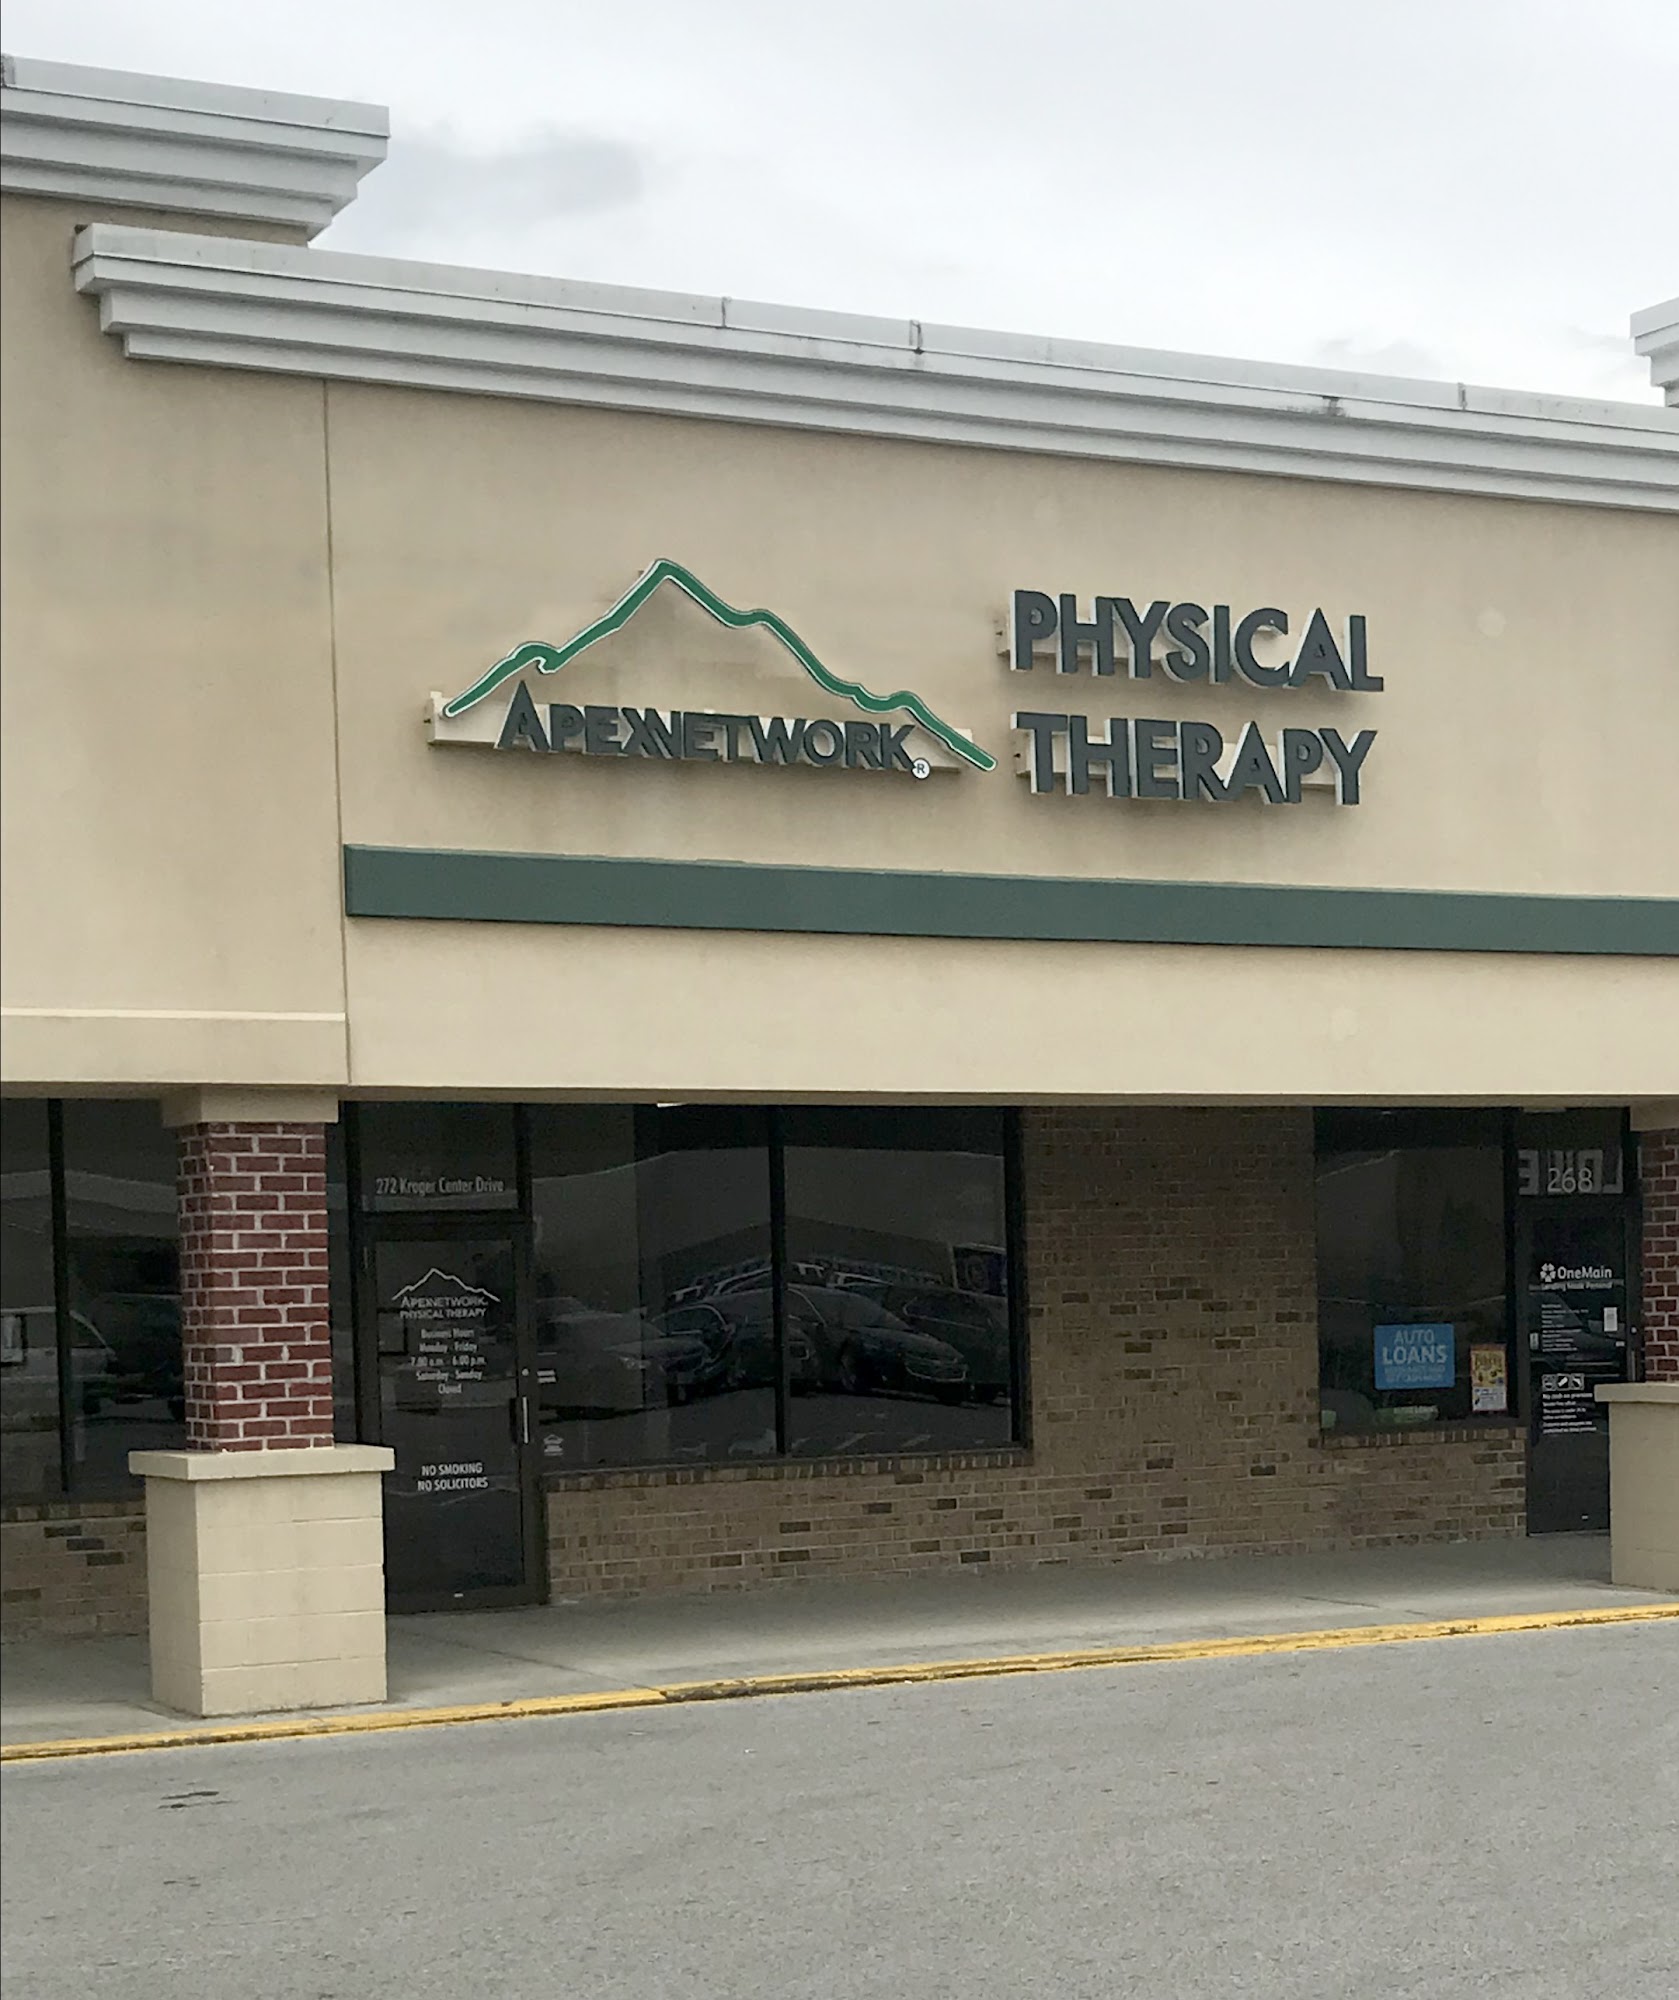 ApexNetwork Physical Therapy 272 Kroger Center Dr, Morehead Kentucky 40351